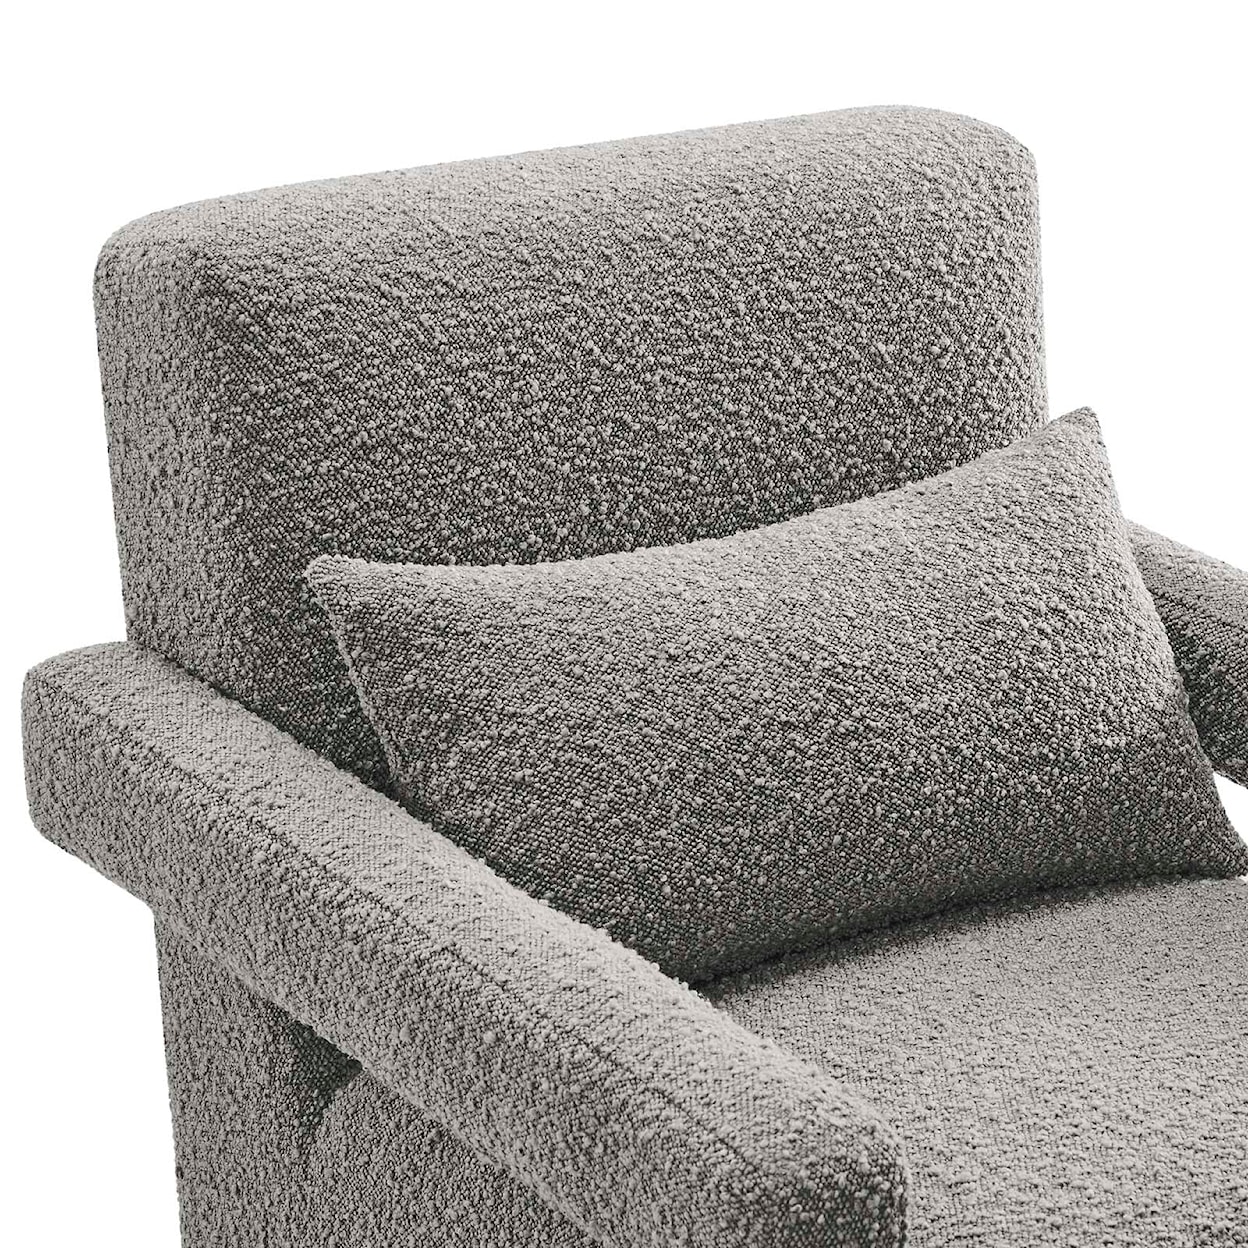 Modway Mirage Mirage Boucle Upholstered Armchair